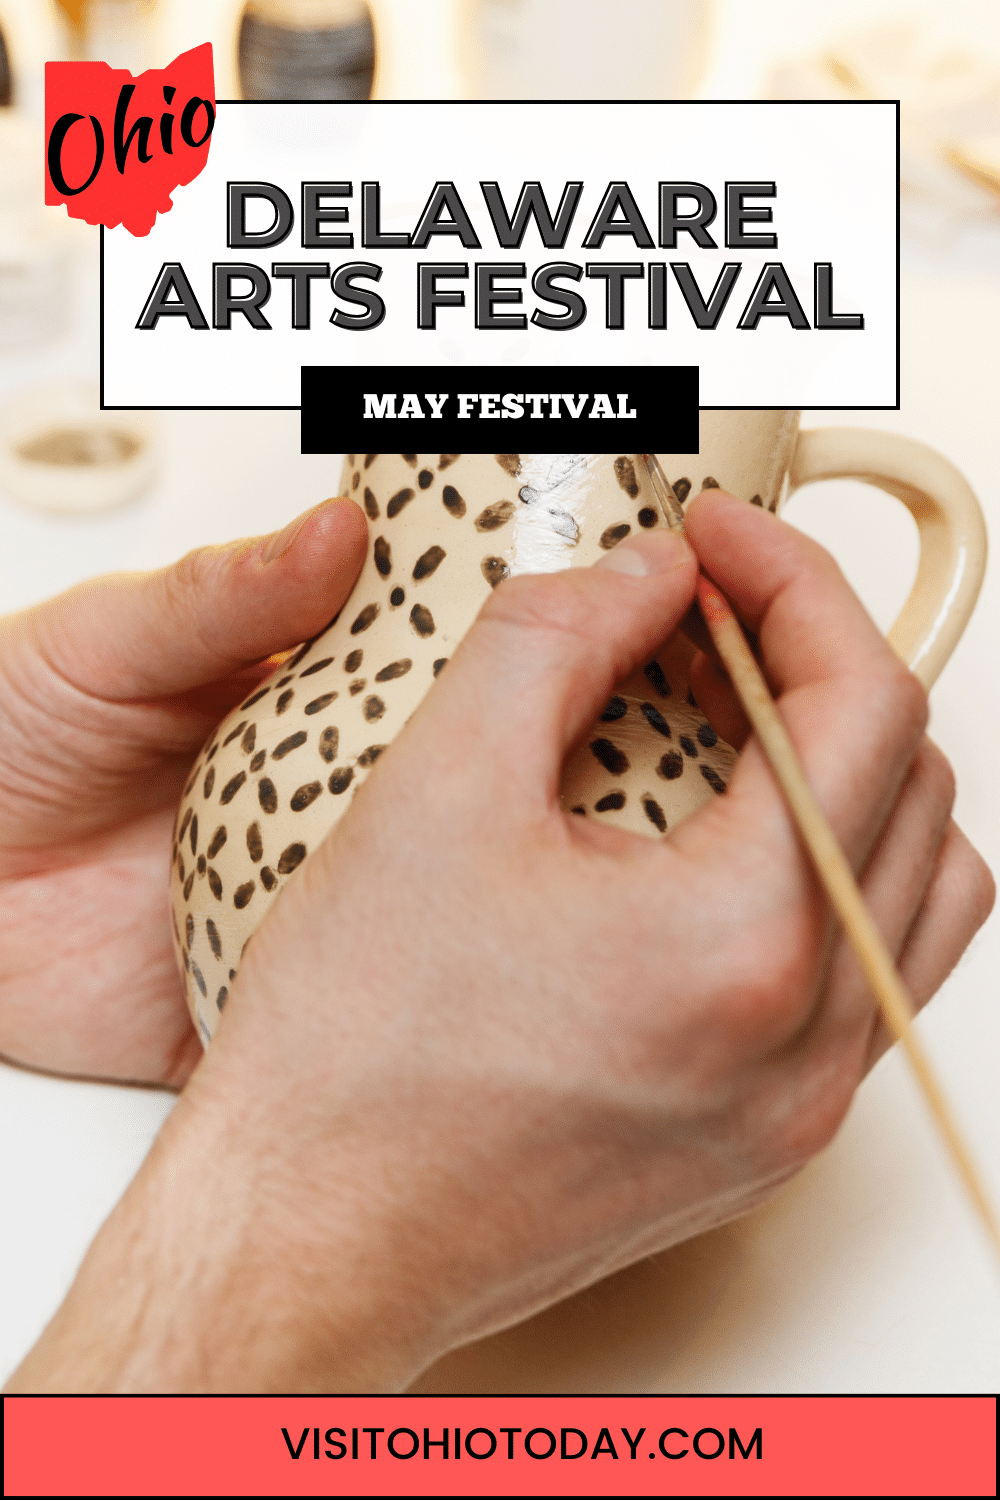 Delaware Arts Festival is a family-friendly arts festival that will take place in mid-May in Downtown Delaware, Ohio.